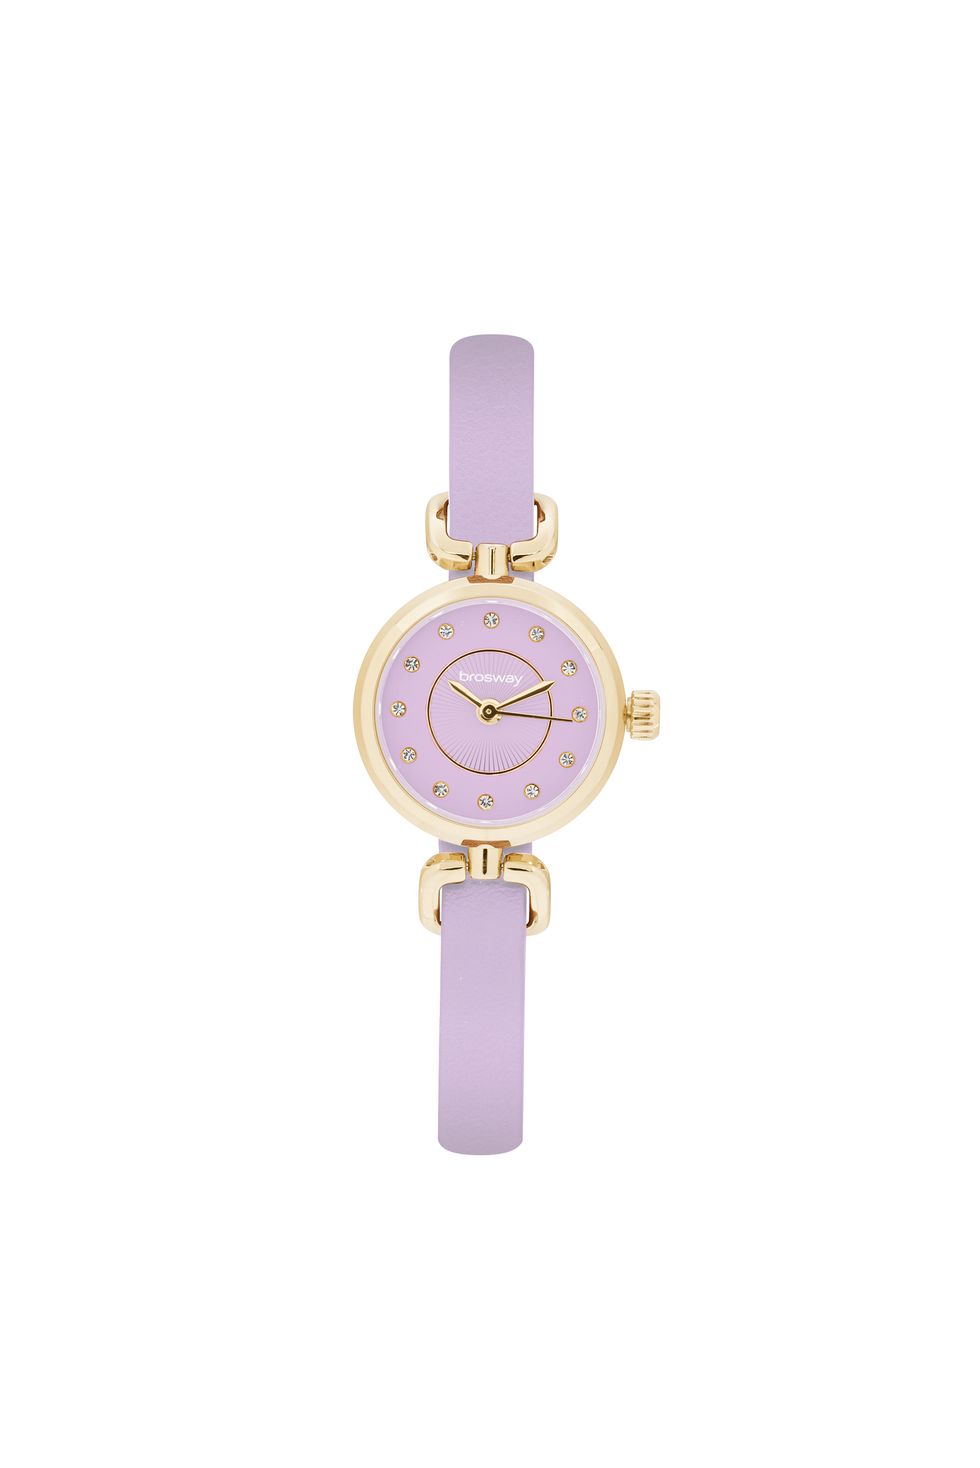 Analog watch, Violet, Watch, Lilac, Purple, Fashion accessory, Lavender, Jewellery, Strap, Material property, 